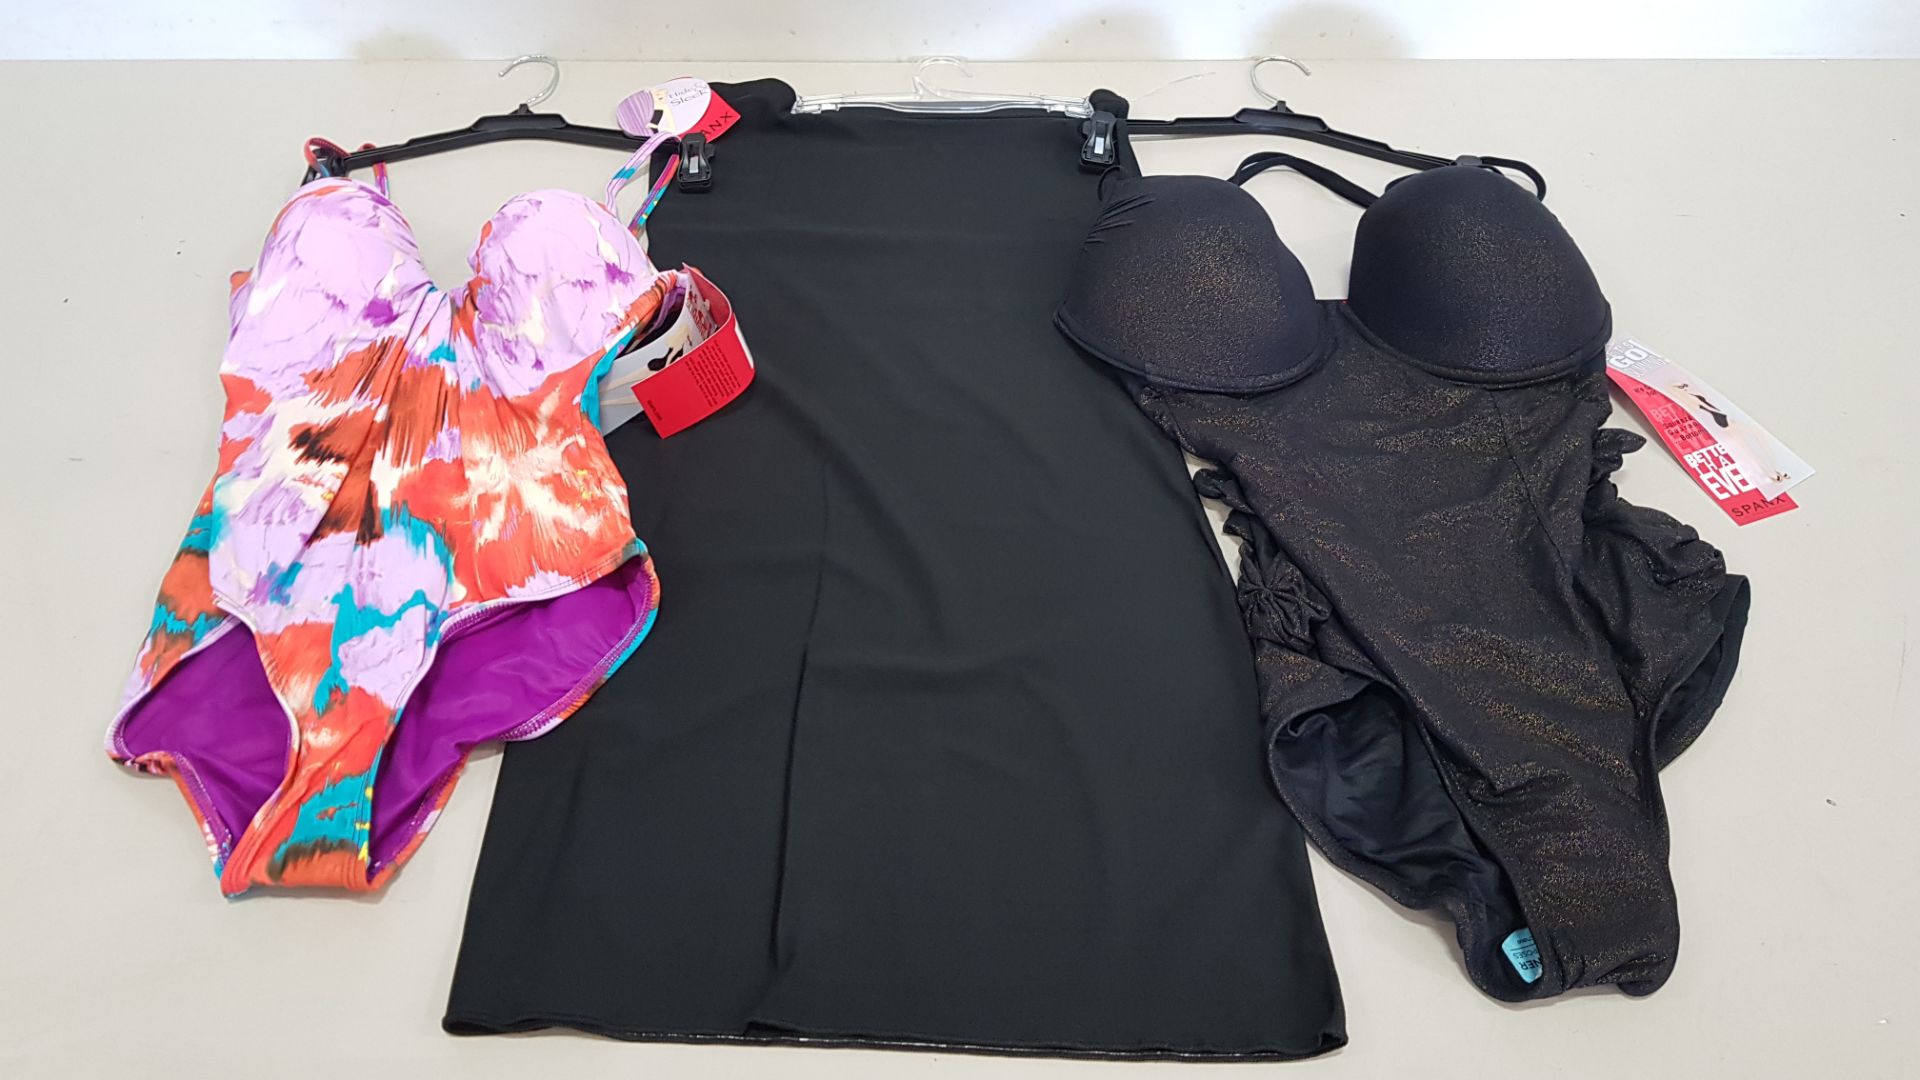 7 PIECE MIXED SPANX LOT CONTAINING 3 X SPANX BLACK & GOLD ONE PIECE SWIMSUITS AND 4 X SPANX AQUA